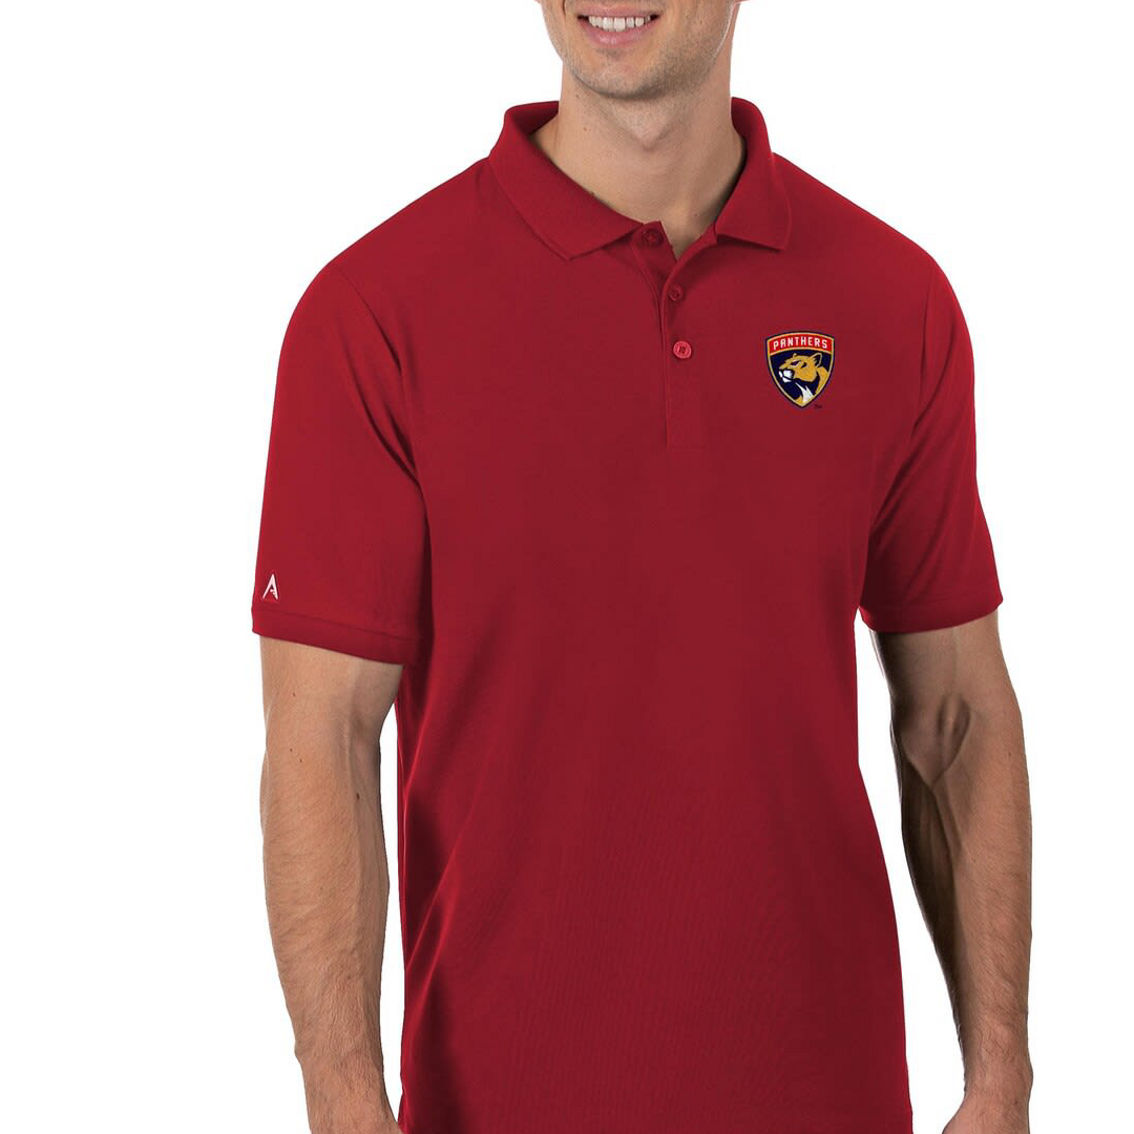 Antigua Men's Red Florida Panthers Legacy Pique Polo - Image 2 of 2